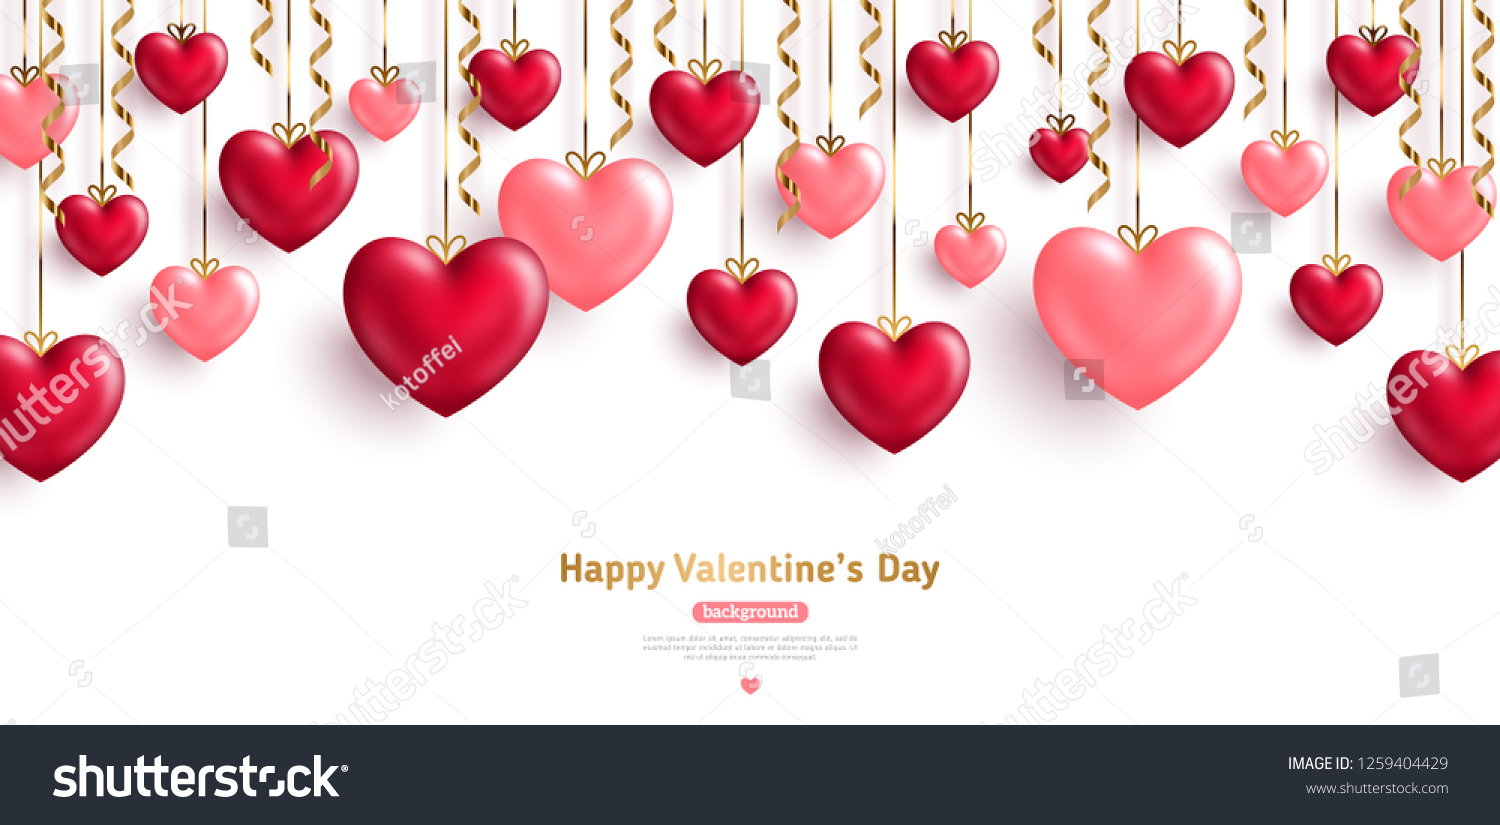 Happy Saint Valentine's day card, hanging pink and red hearts with gold streamers on white background. Place for text. #1259404429